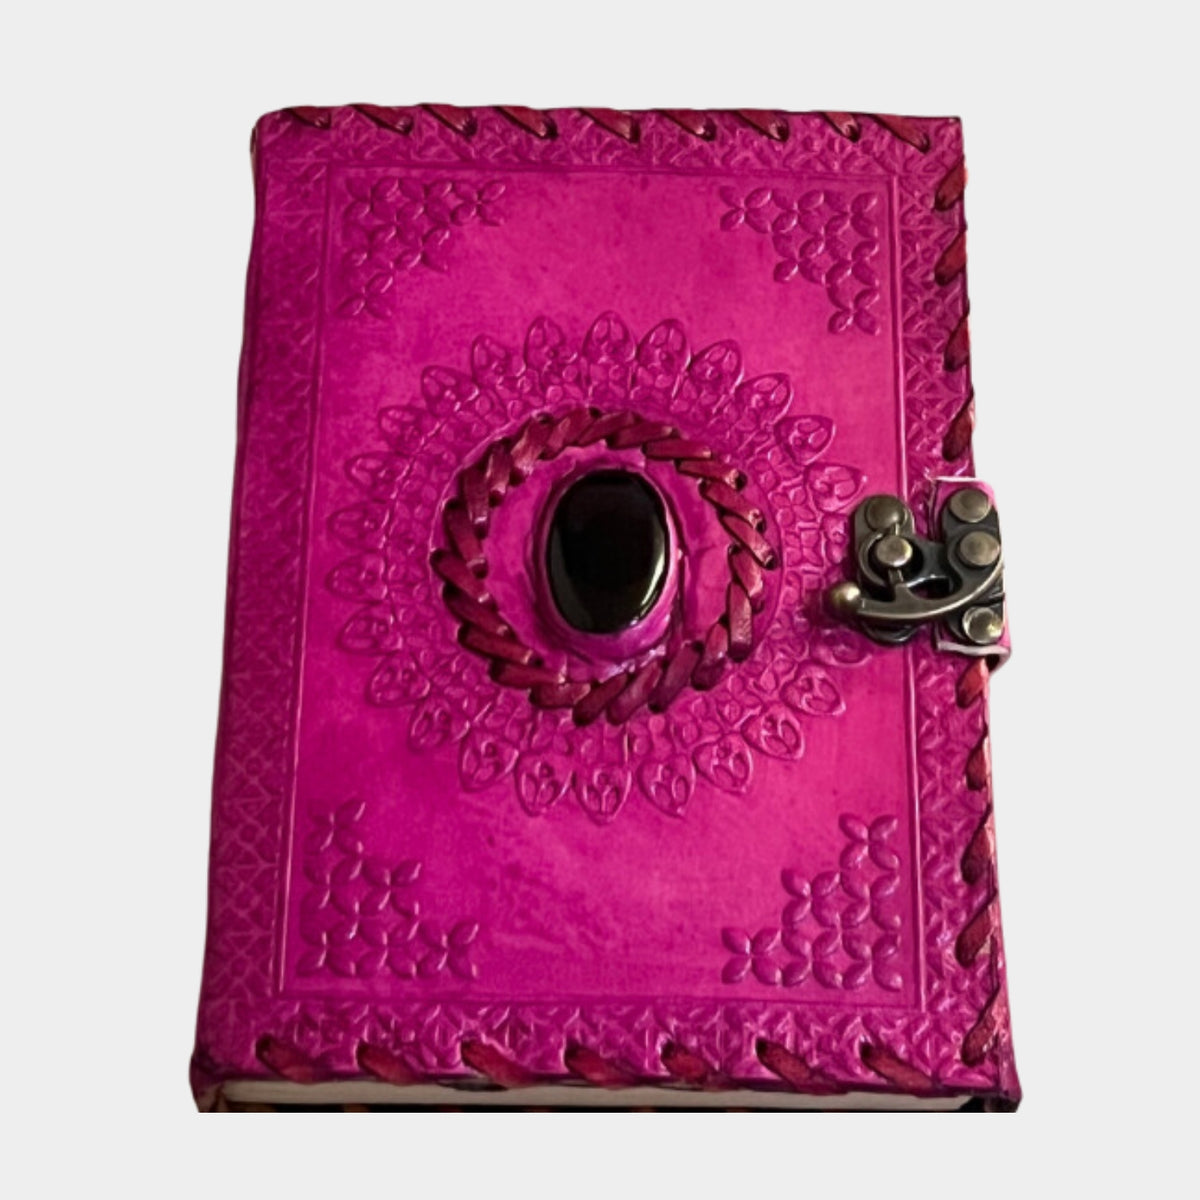 Ruby Stone Pink Leather Journal | Leather Journal Handmade Diary with Green Stone Pink Color and Metal Lock for Closure for Men and Women